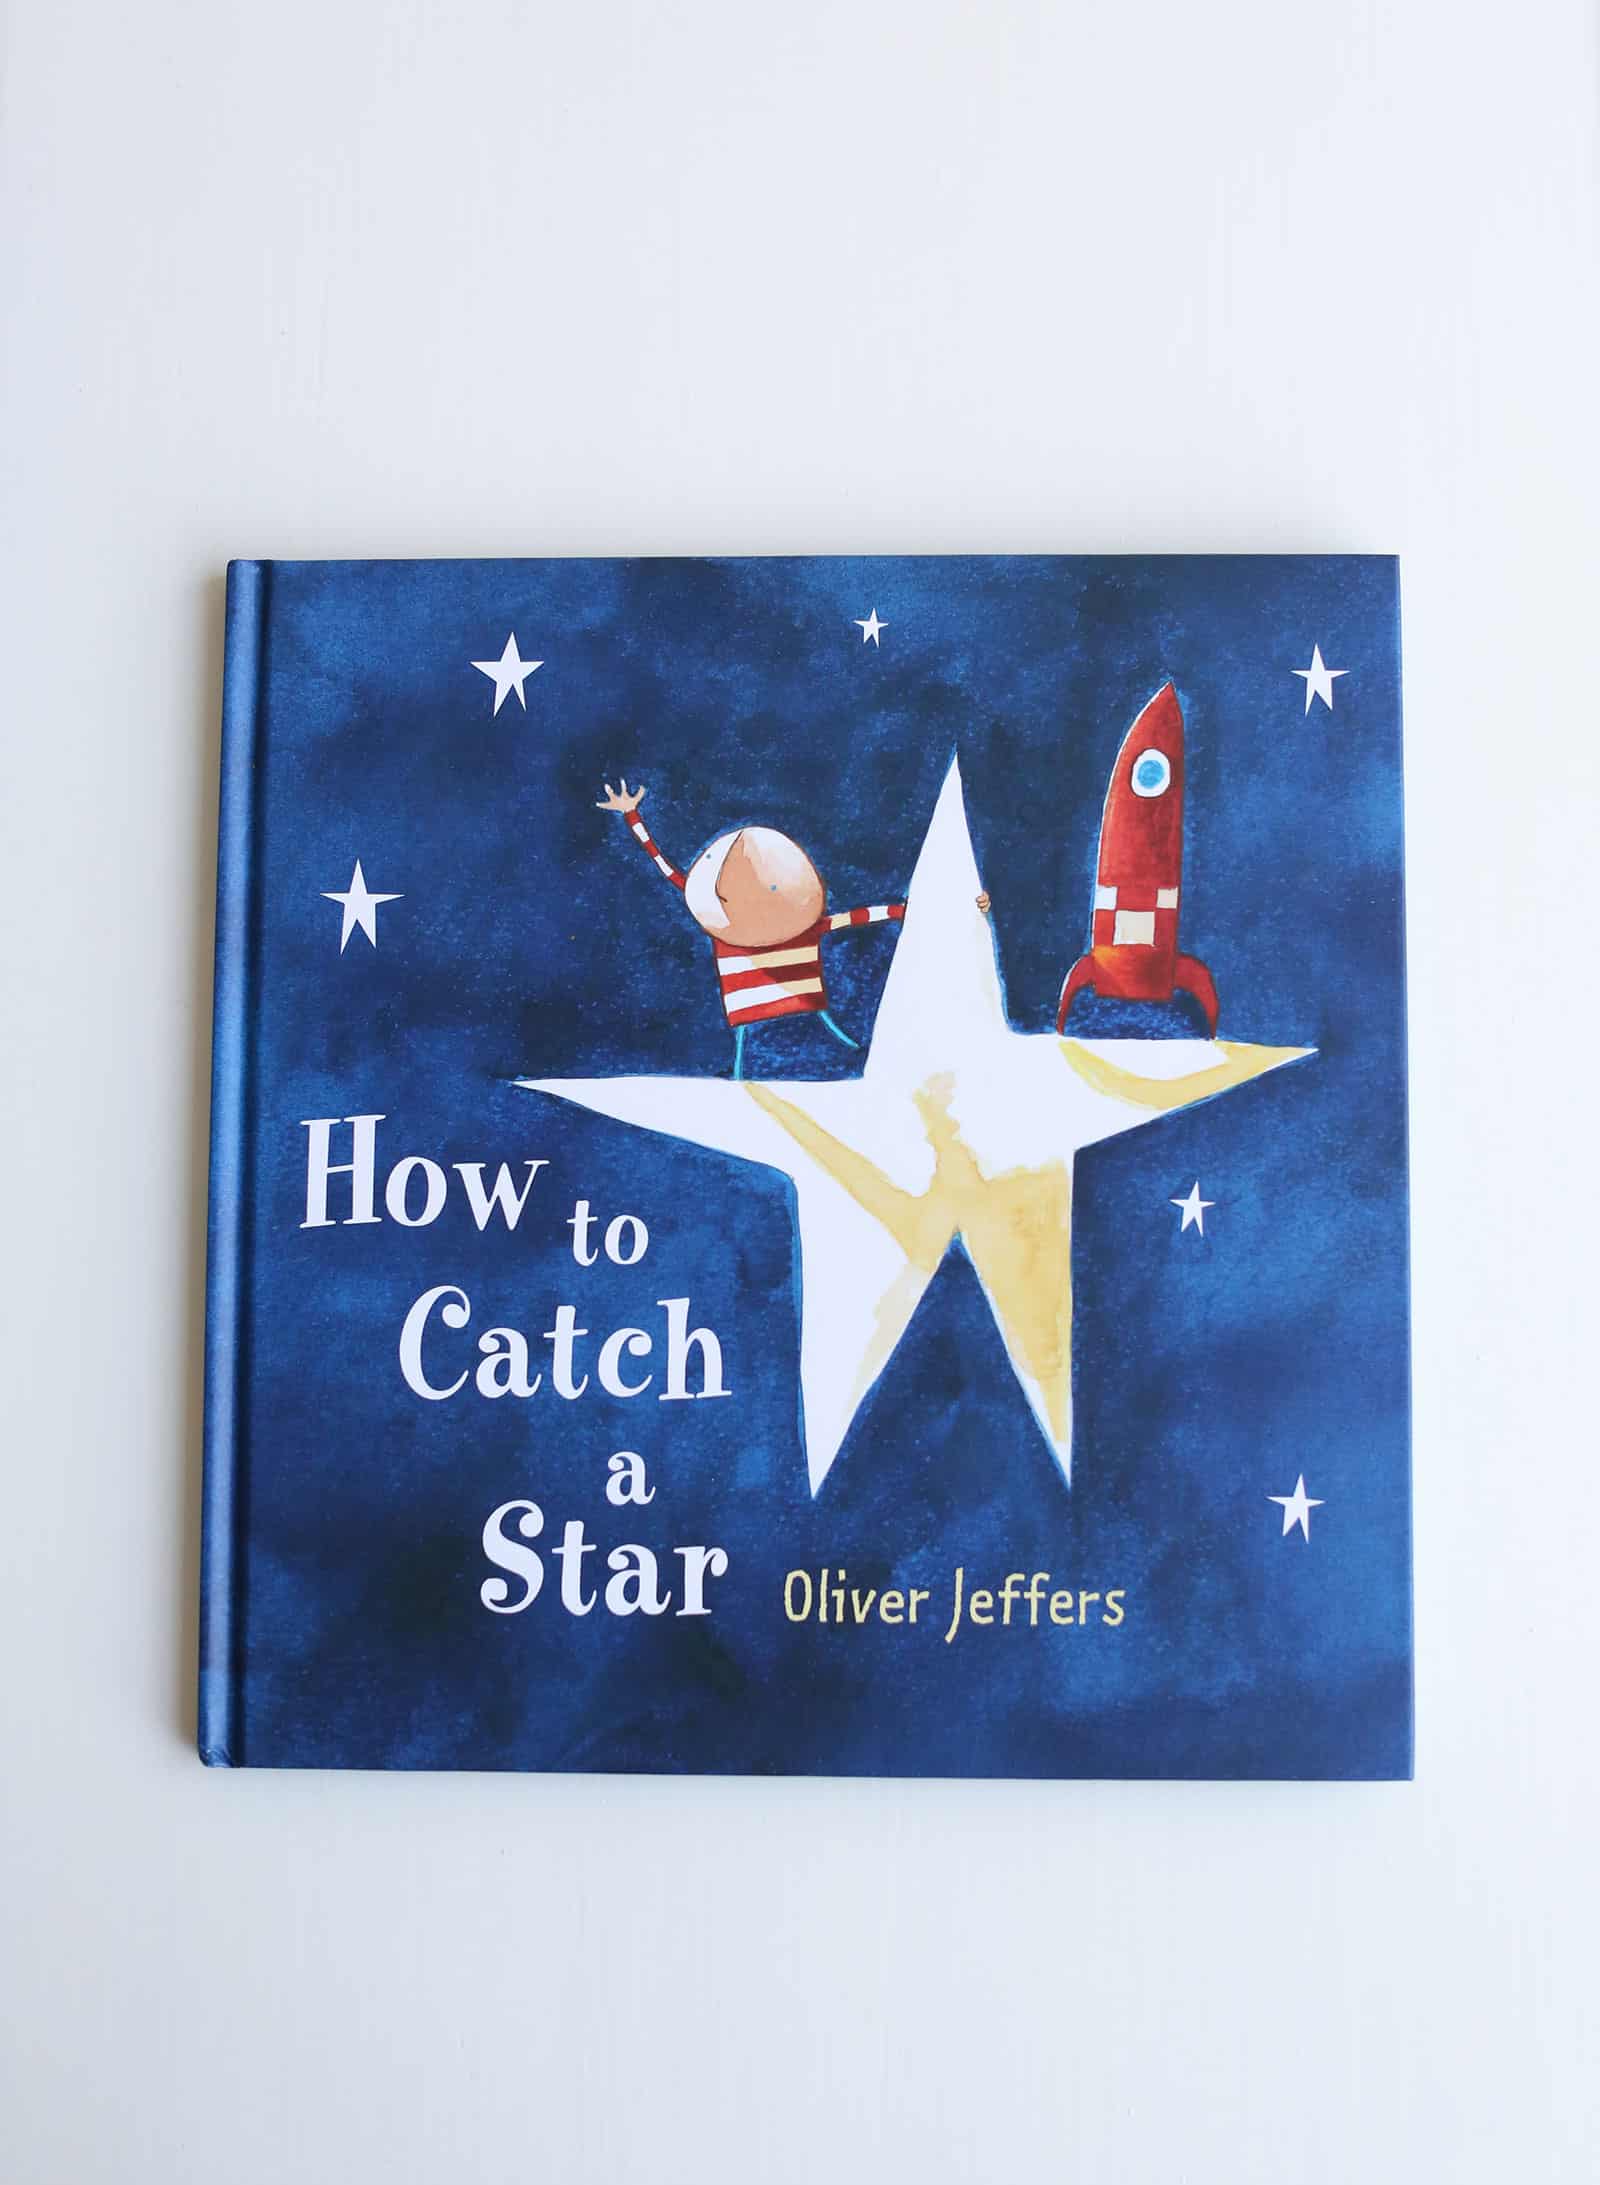 Tiffani Thiessen's Favorite Things • July 2015 • How to Catch a Star by Oliver Jeffers • Photo by Elizabeth Messina